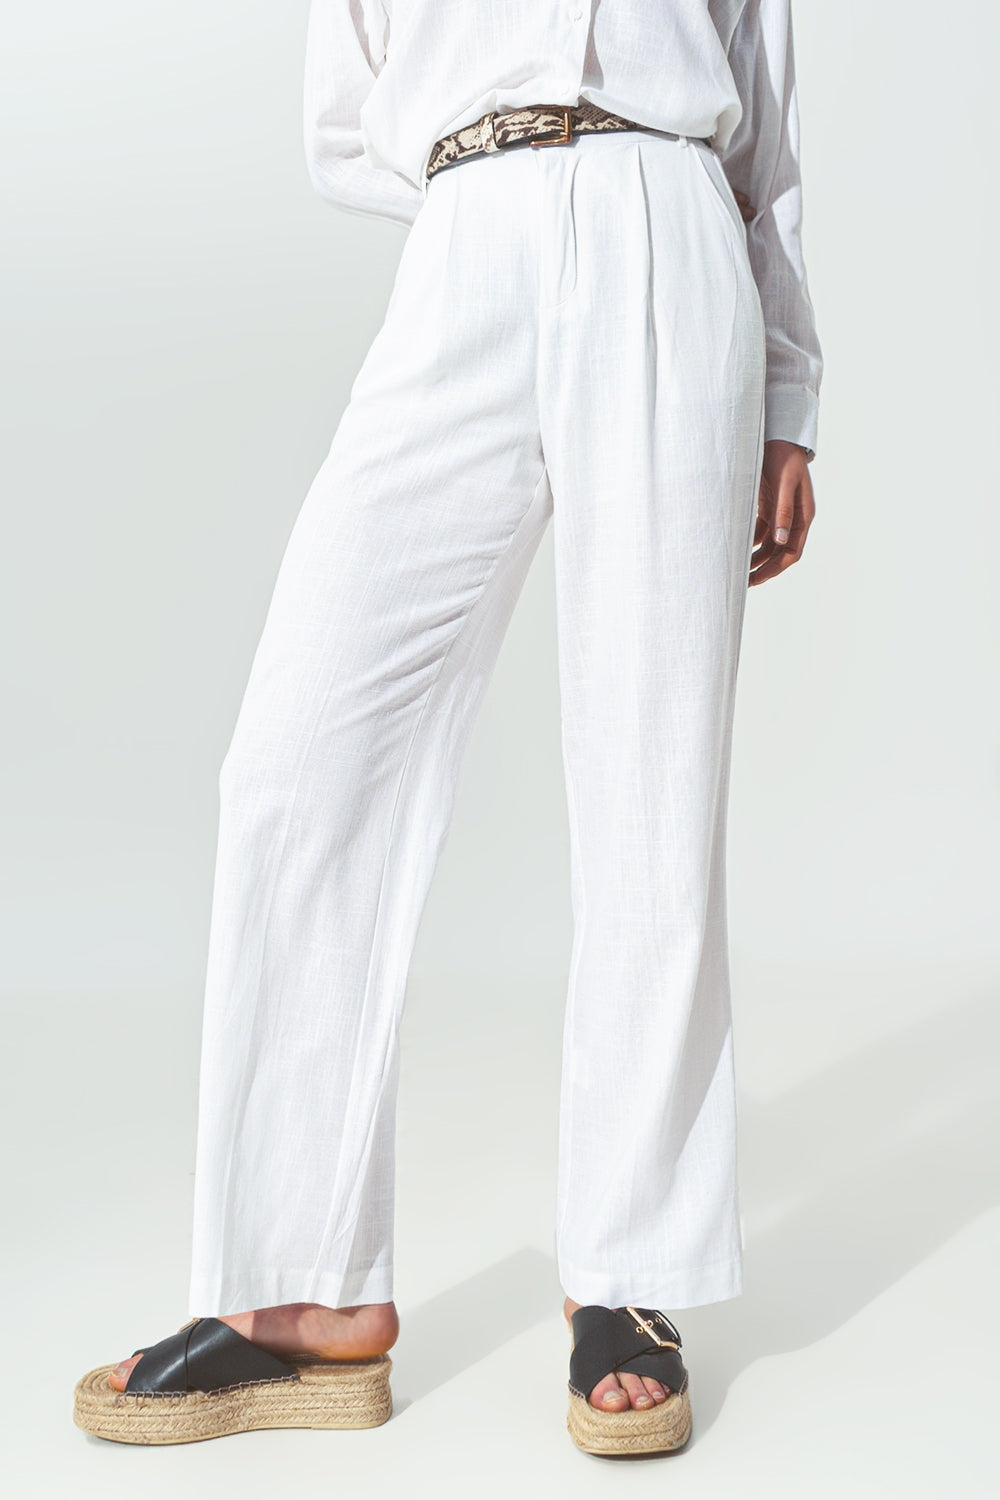 Q2 Wide-legged pants in light cotton fabric in white